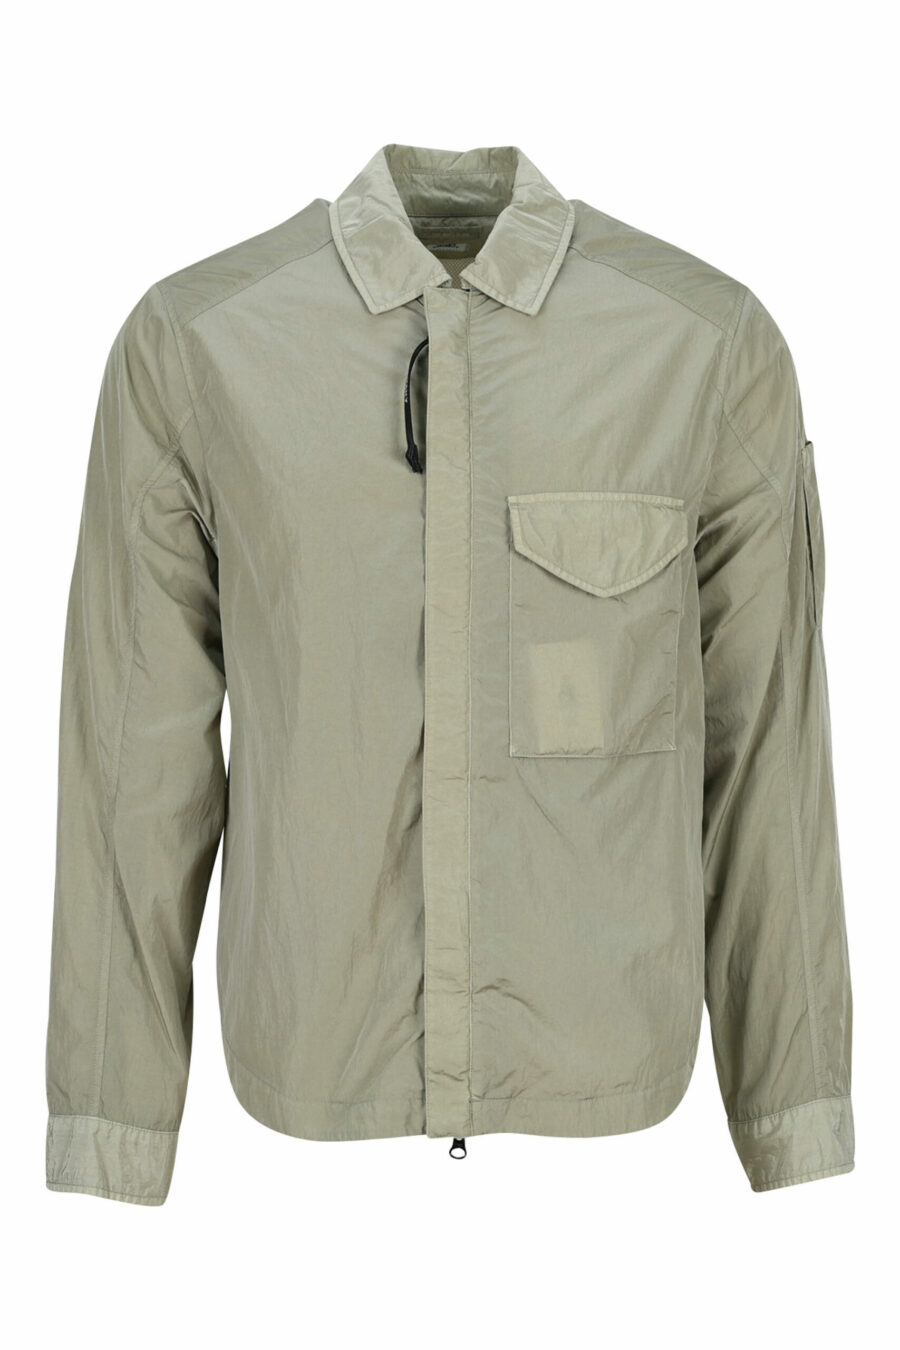 Chaqueta beige impermeable con logo lente lateral - 7620943555387 scaled